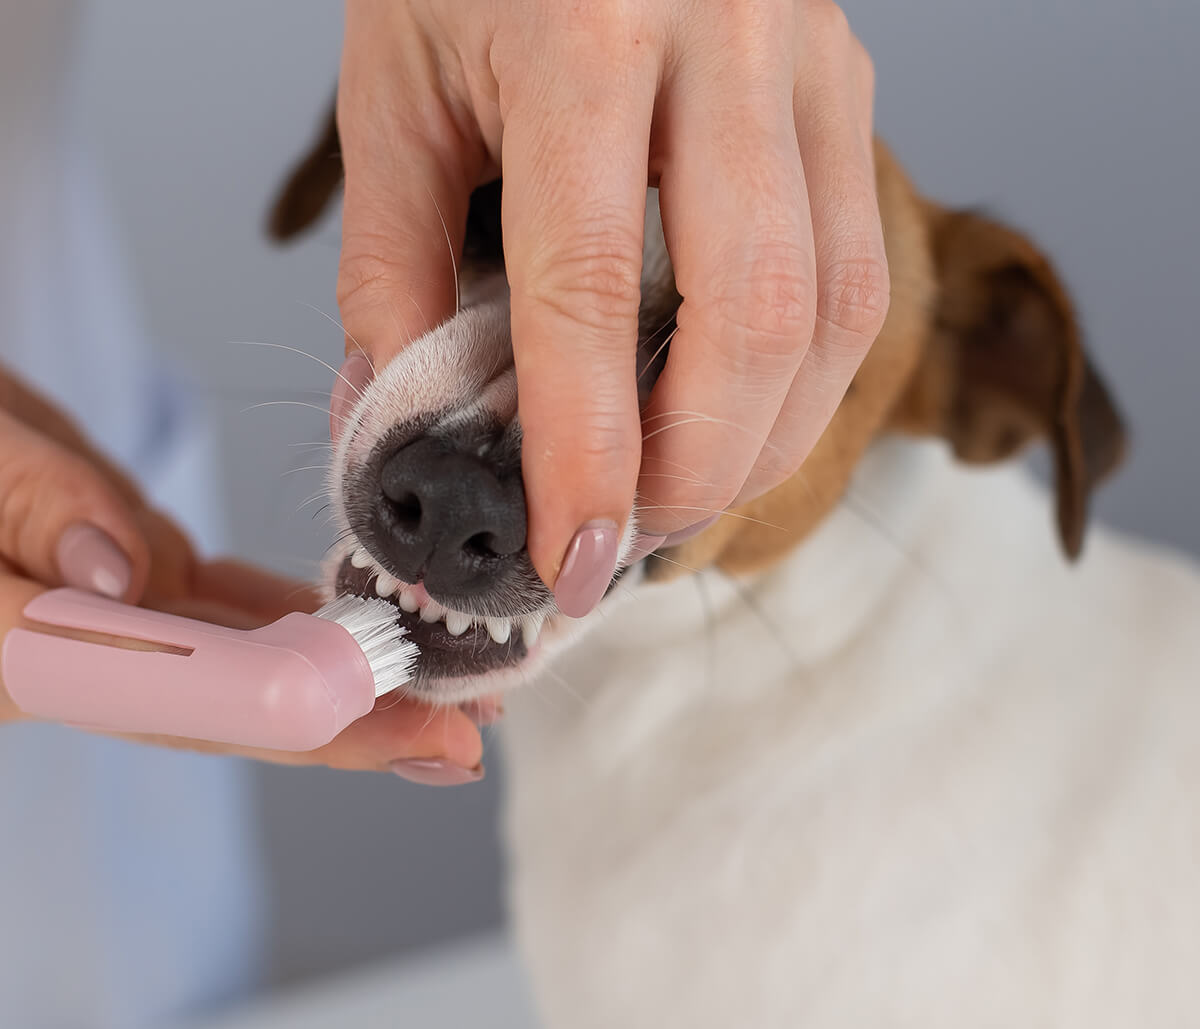 Dentistry services – Why they are vital to the overall health, and wellbeing of your pet